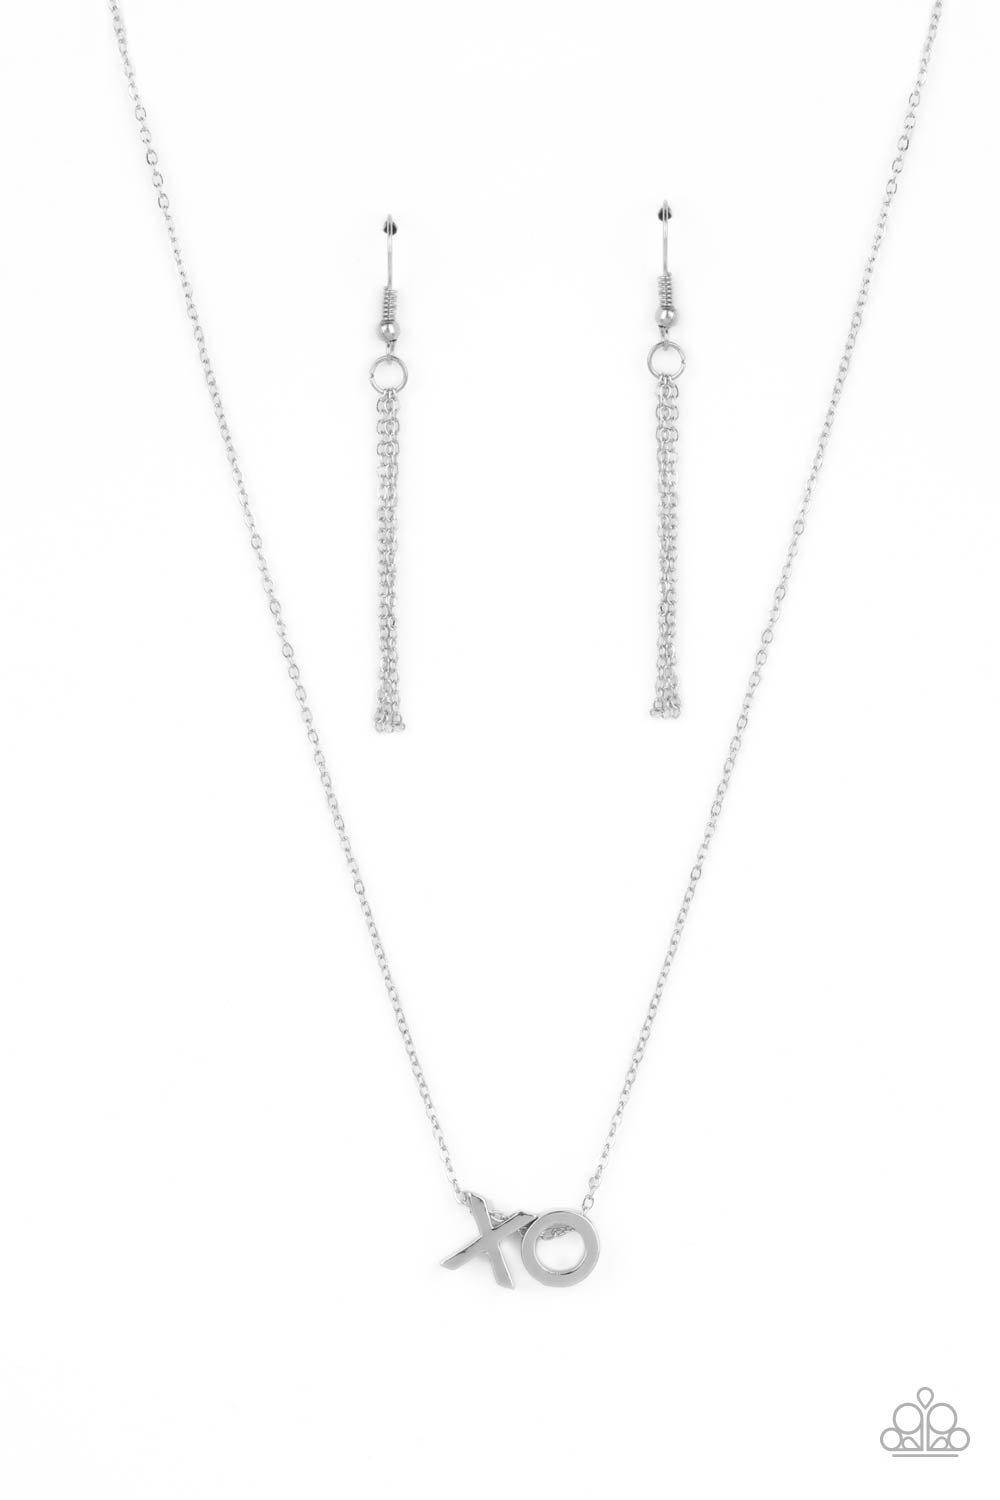 Paparazzi ♥ Hugs and Kisses - Silver ♥ Necklace